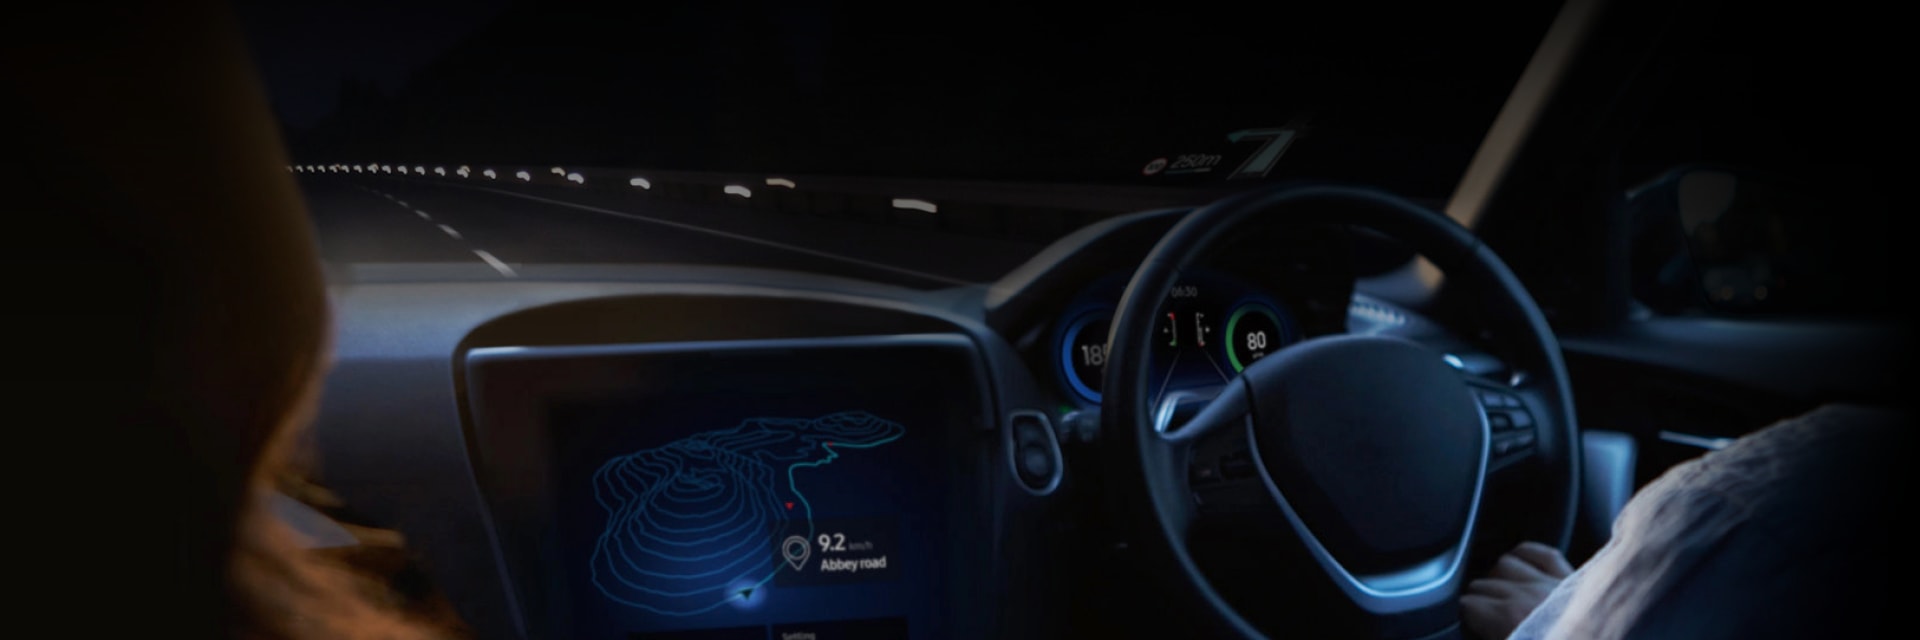 Explanatory image of an in-vehicle infotainment system equipped with a multi-display.